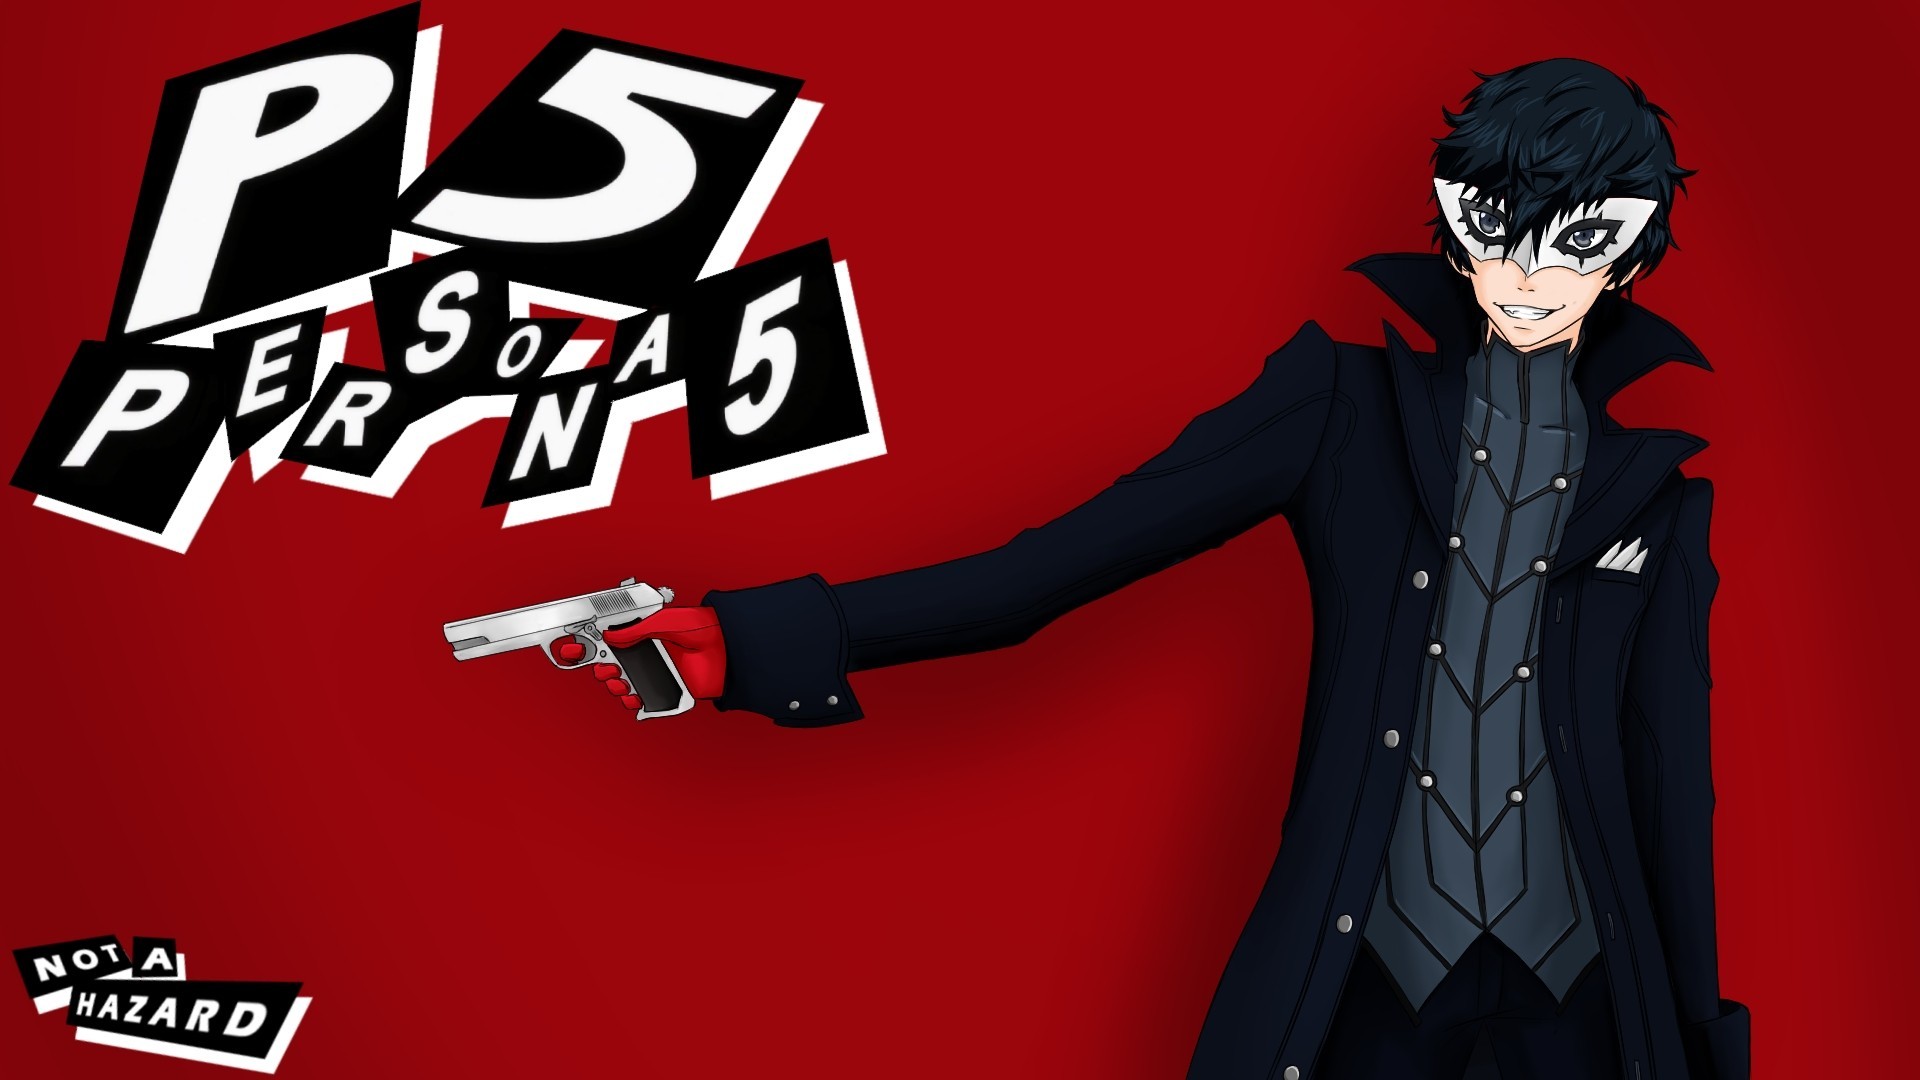 Persona 5 wallpapers best hd